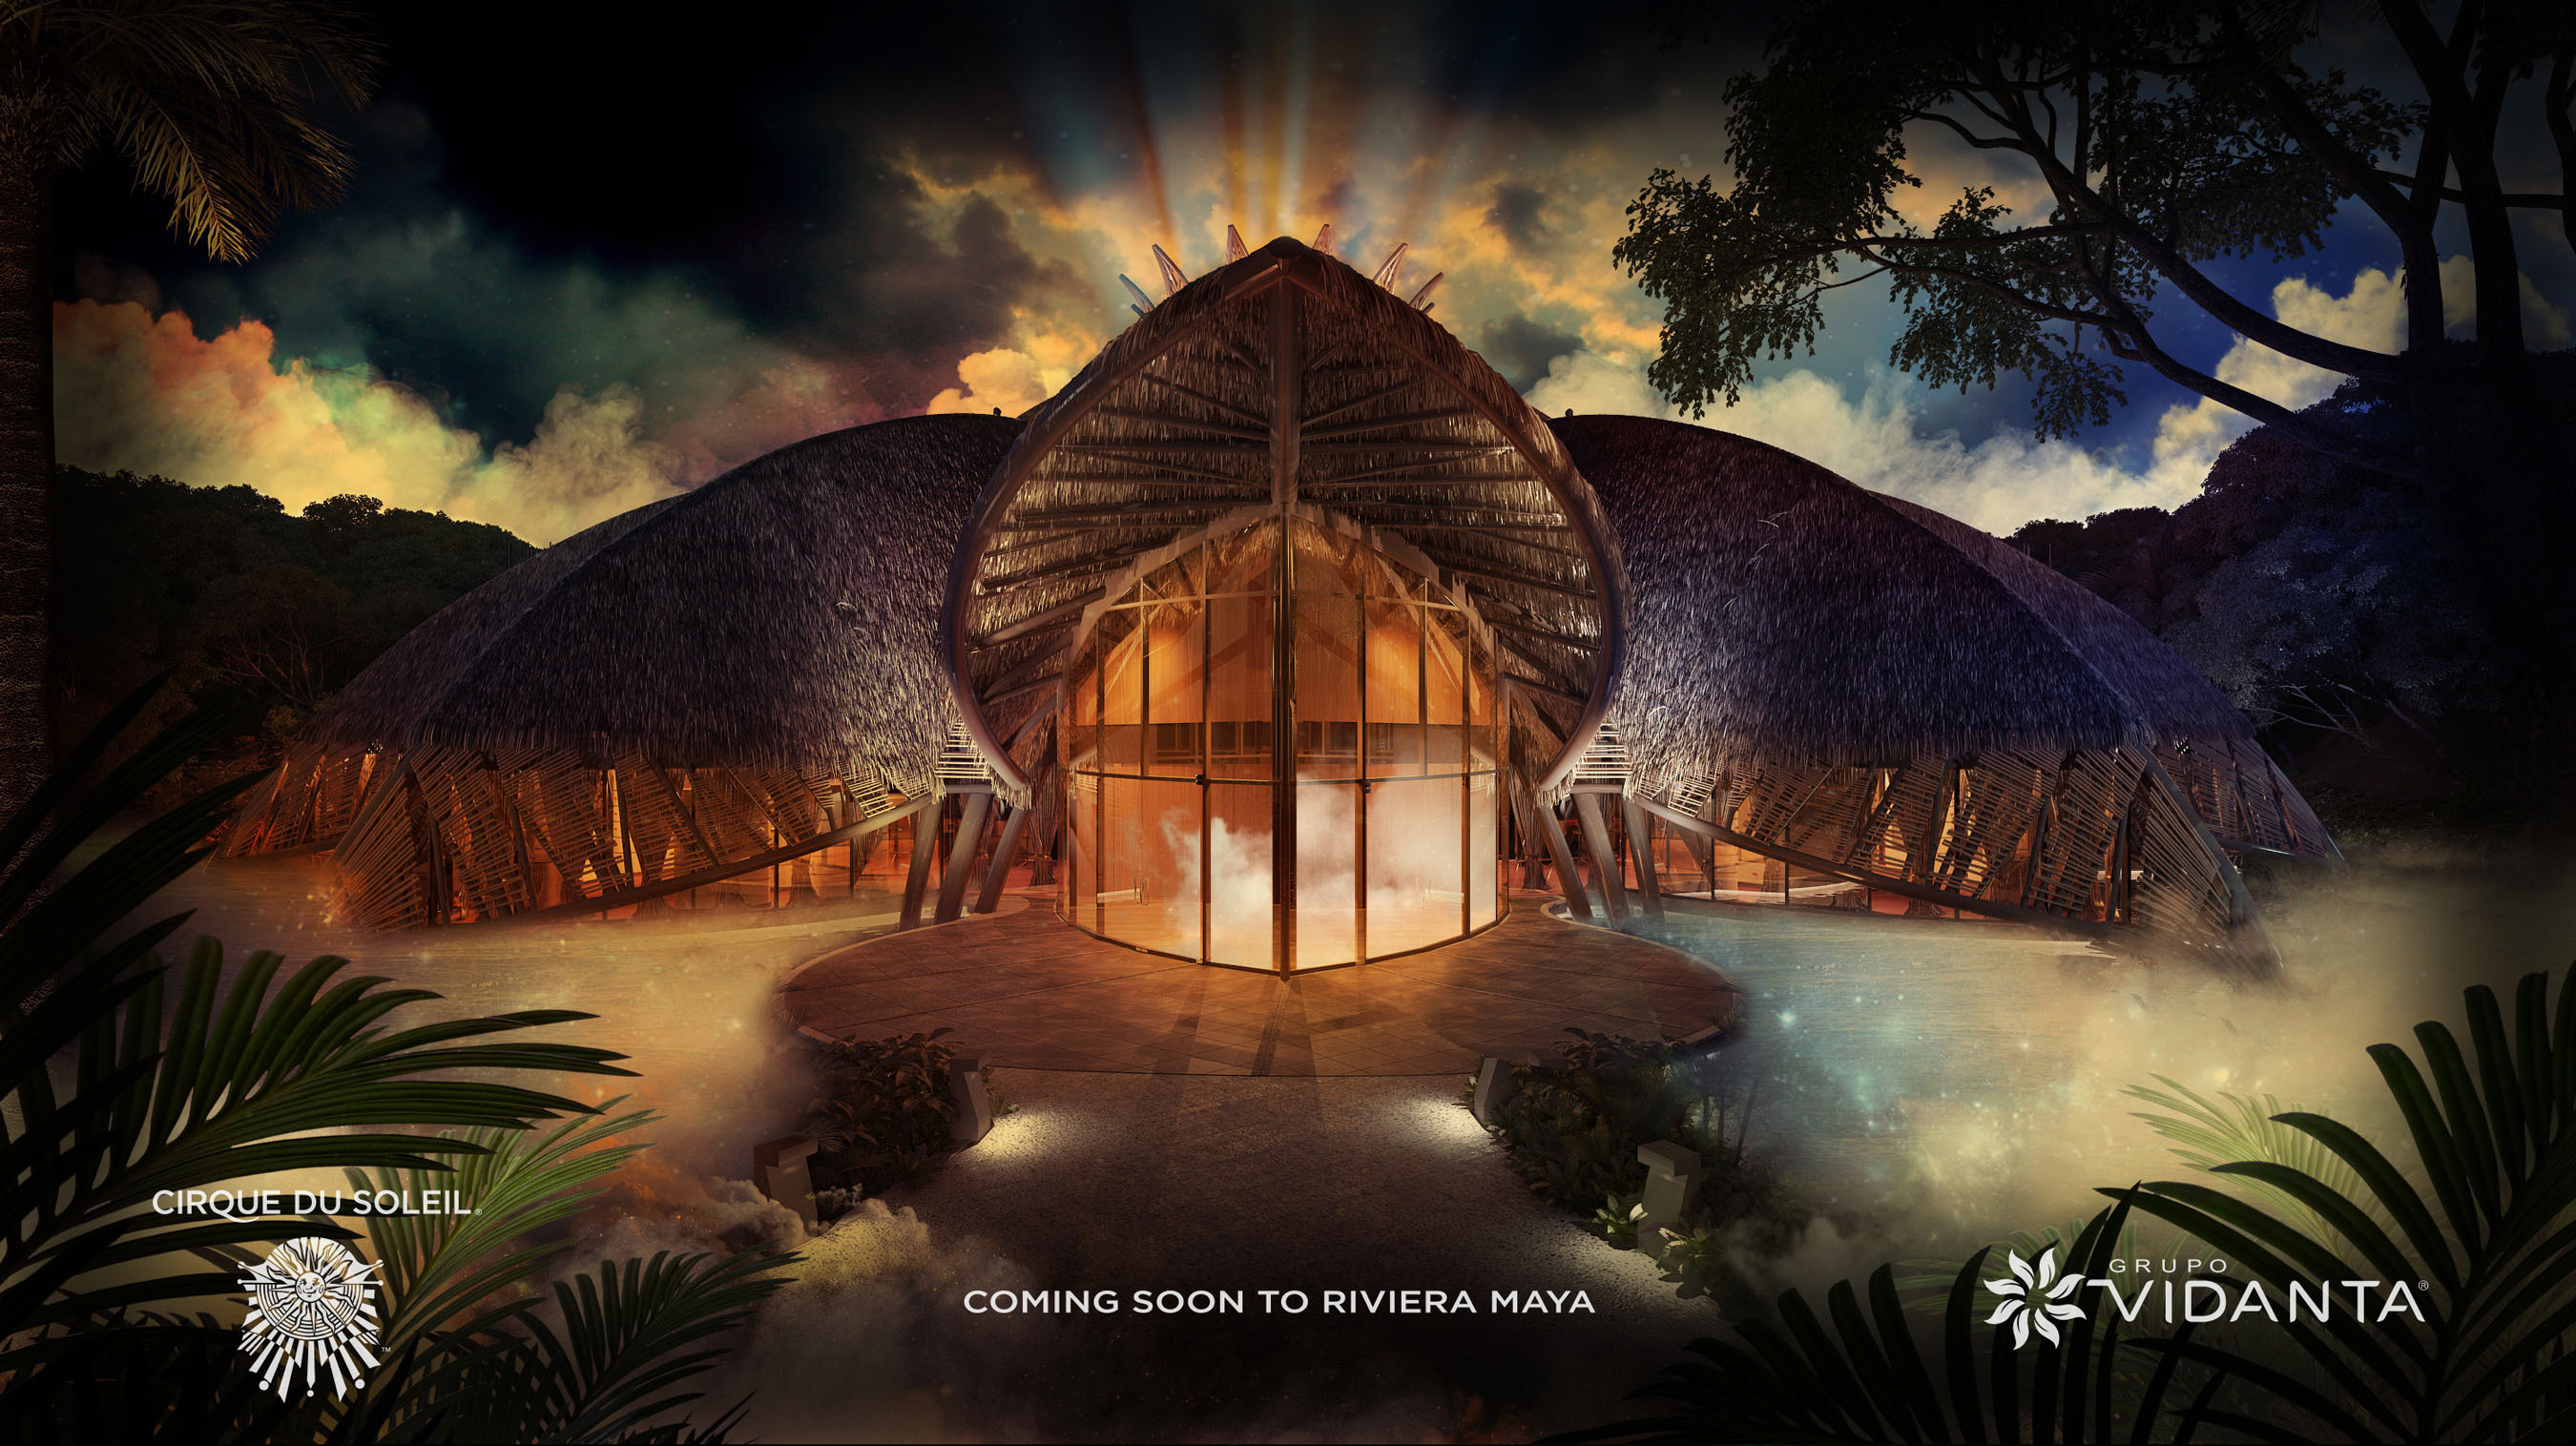 The custom-designed Vidanta Theater will house the first resident Cirque du Soleil show in Mexico. (PRNewsFoto/Grupo Vidanta) (PRNewsFoto/GRUPO VIDANTA)